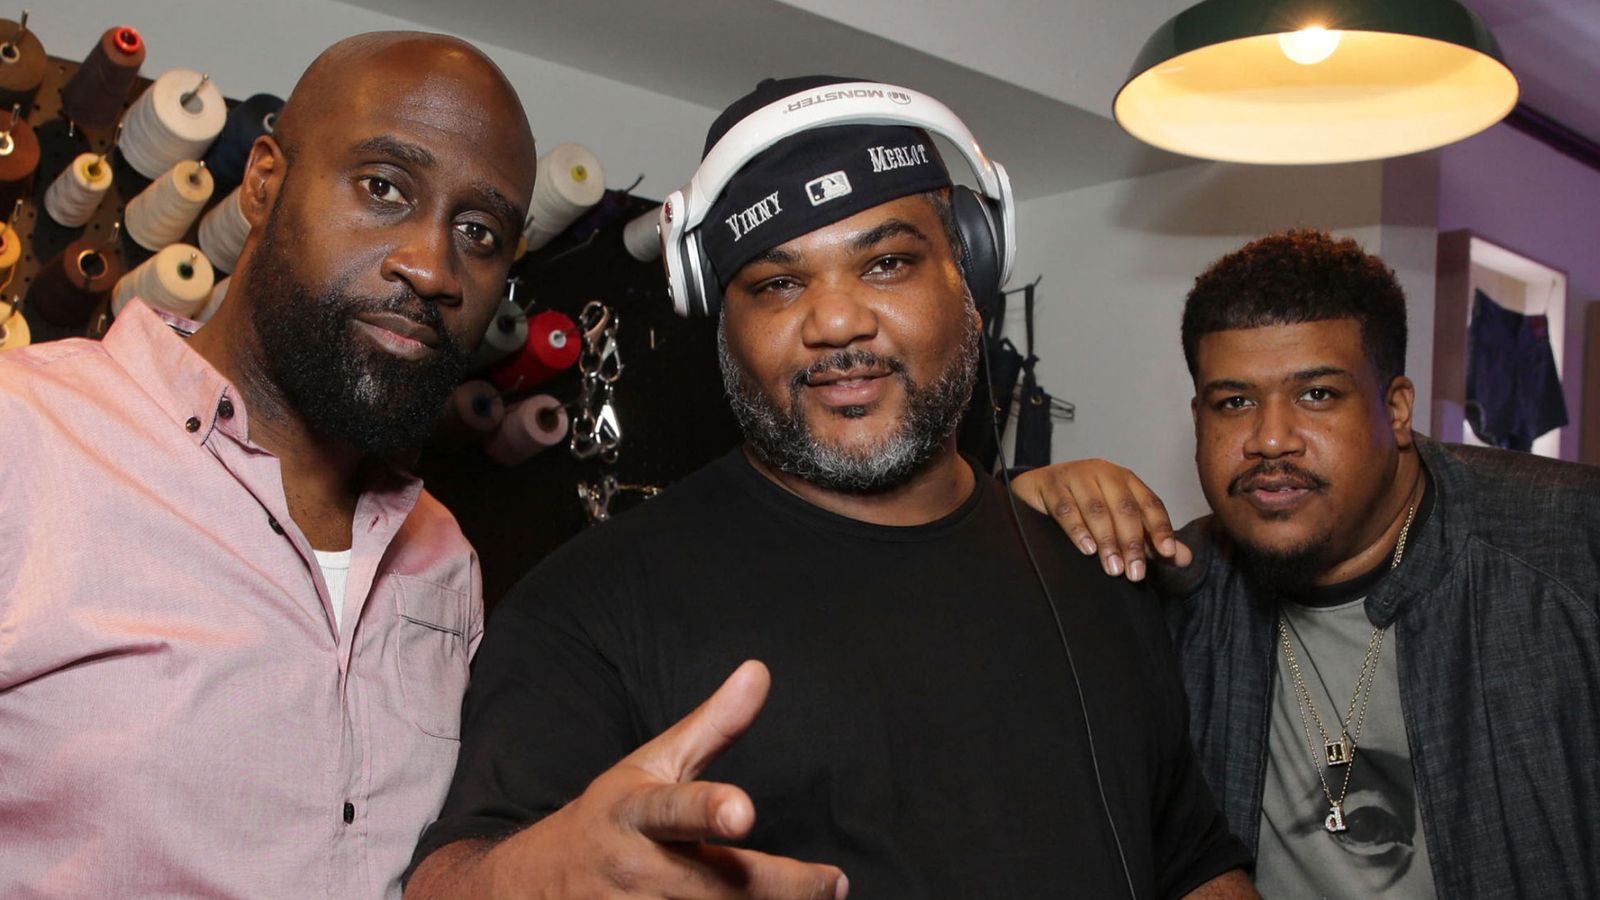 De La Soul's classic back catalogue finally made available for streaming for the first time